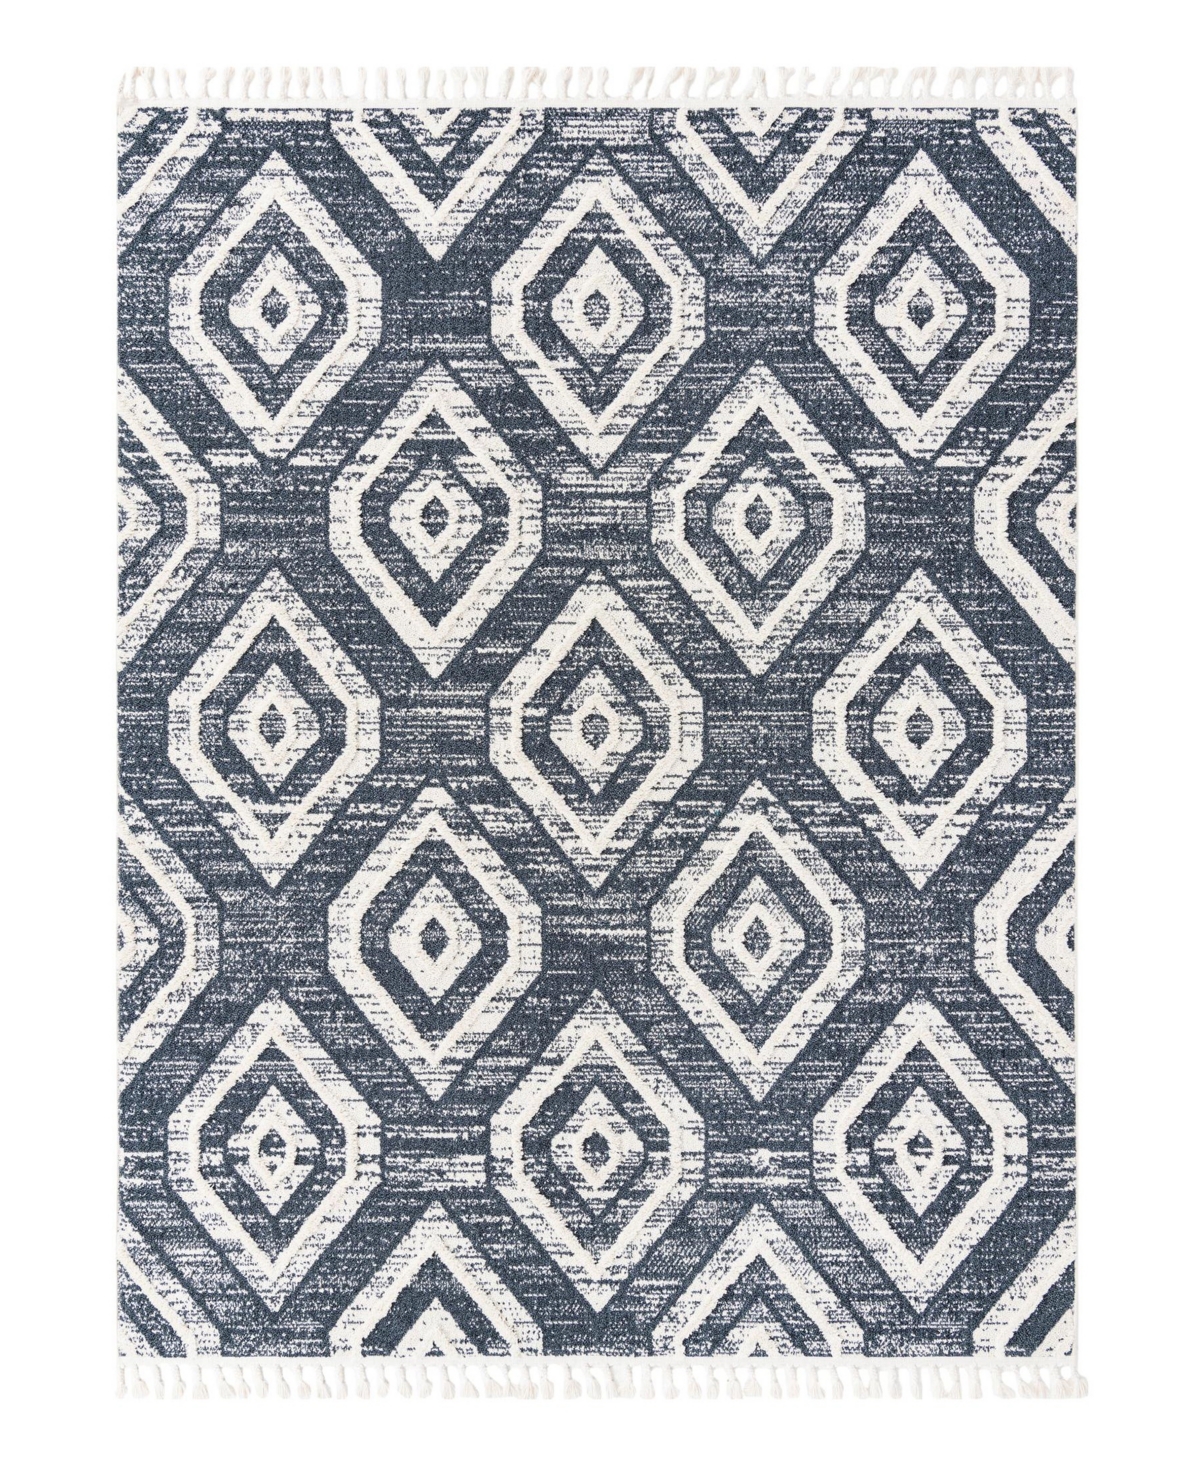 Bayshore Home High-low Pile Upland Upl05 7'10" X 10' Area Rug In Blue,gray